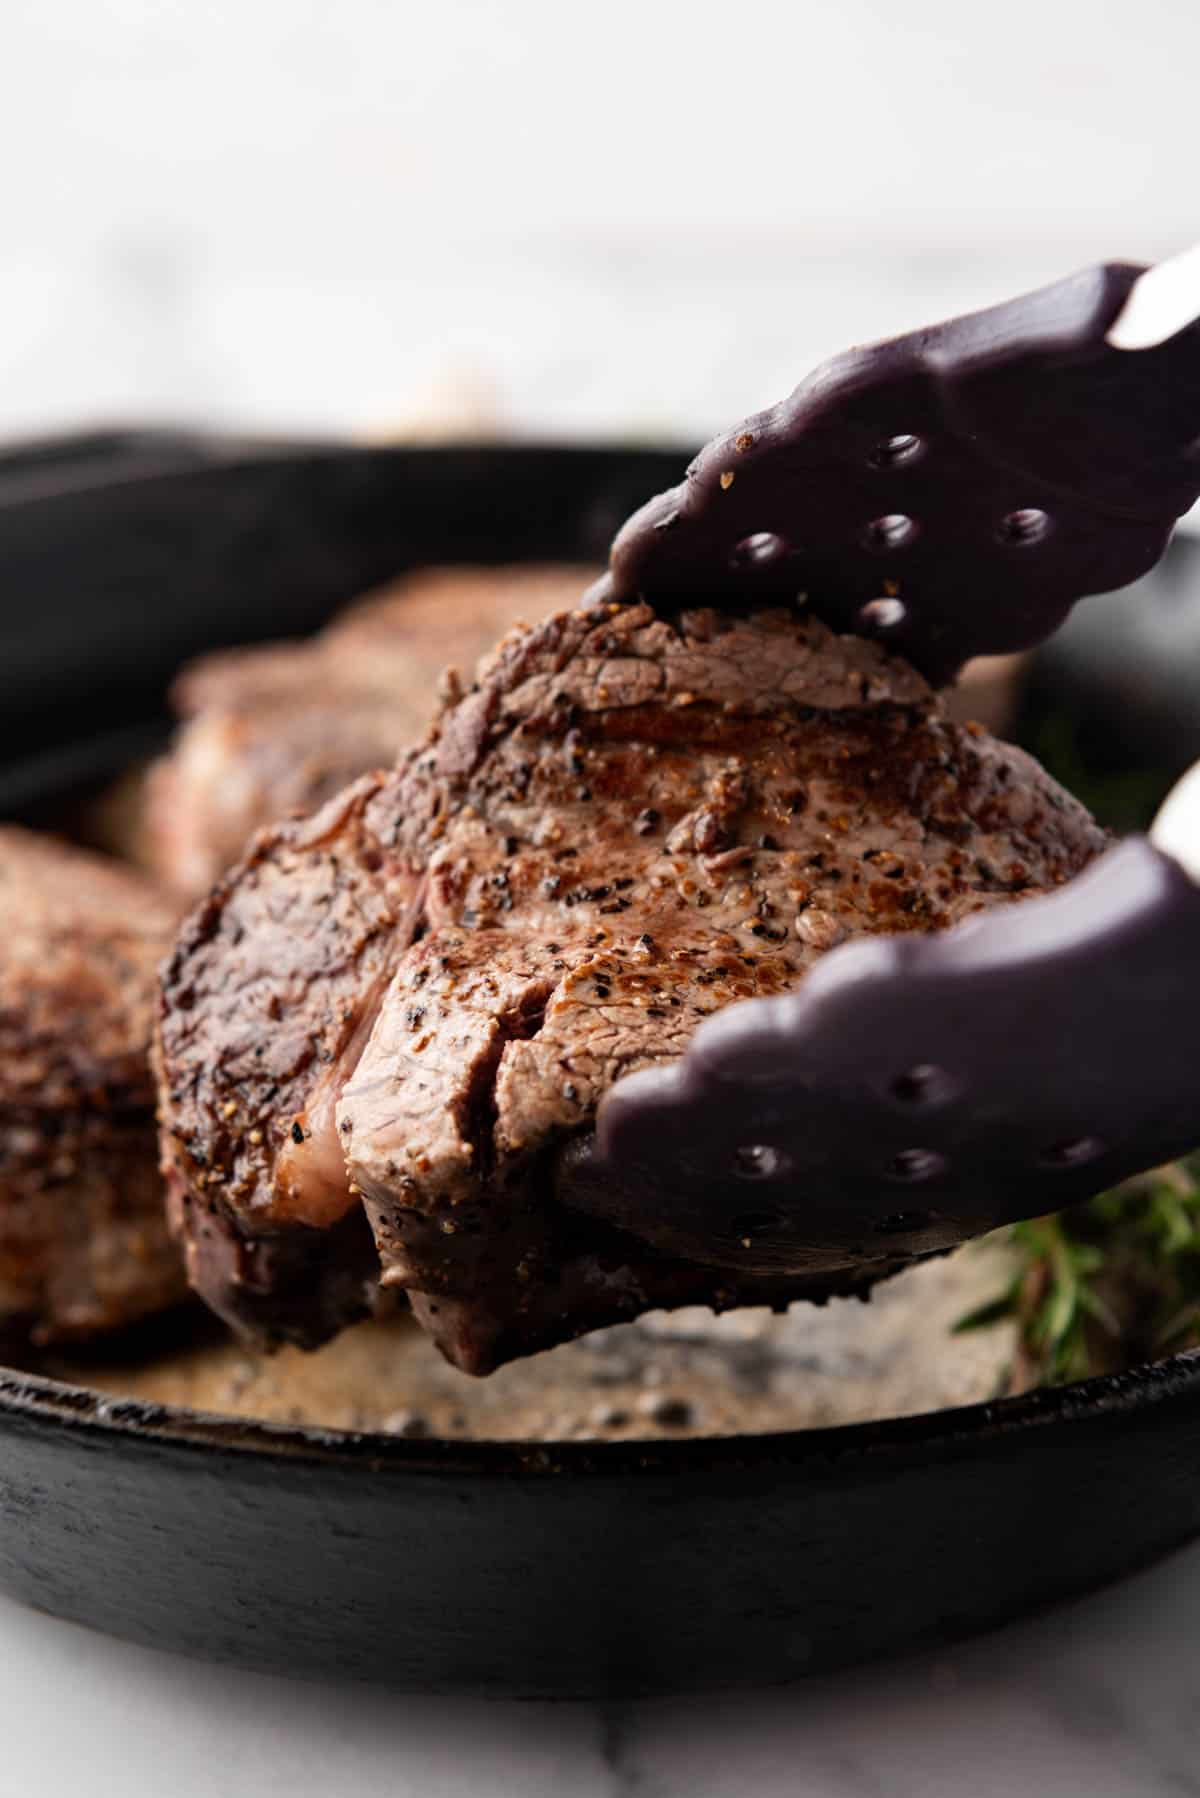 A filet mignon steak being lifted out of a cast iron skillet with tongs.